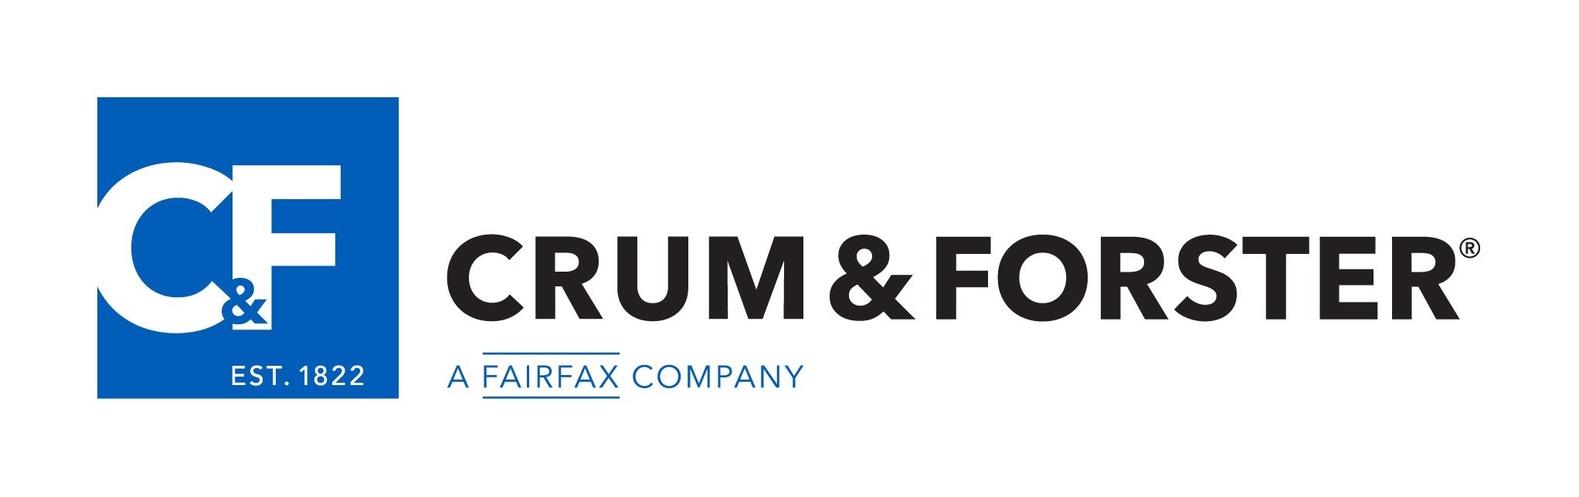 Crum & Forster receives Monitor Life acquisition approval